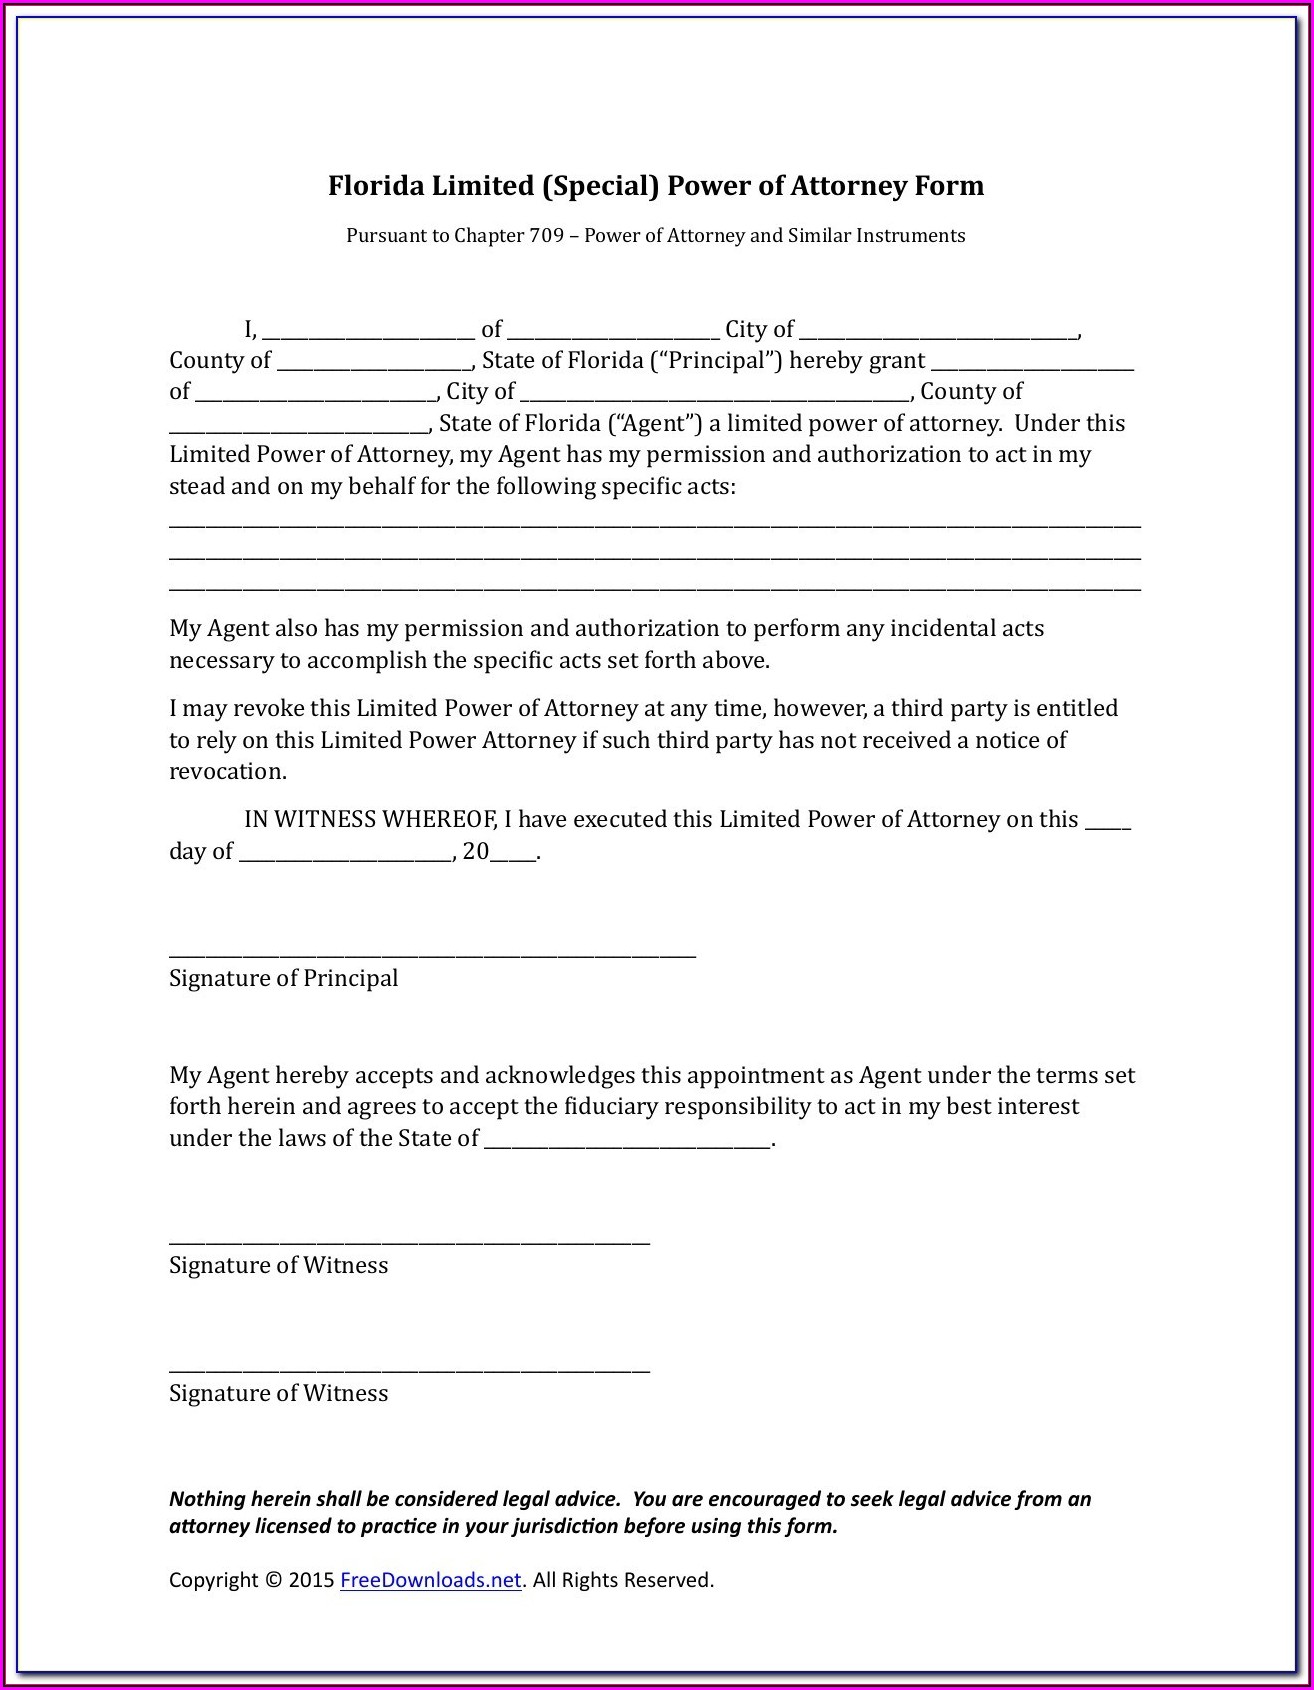 Medical Power Of Attorney Form Download